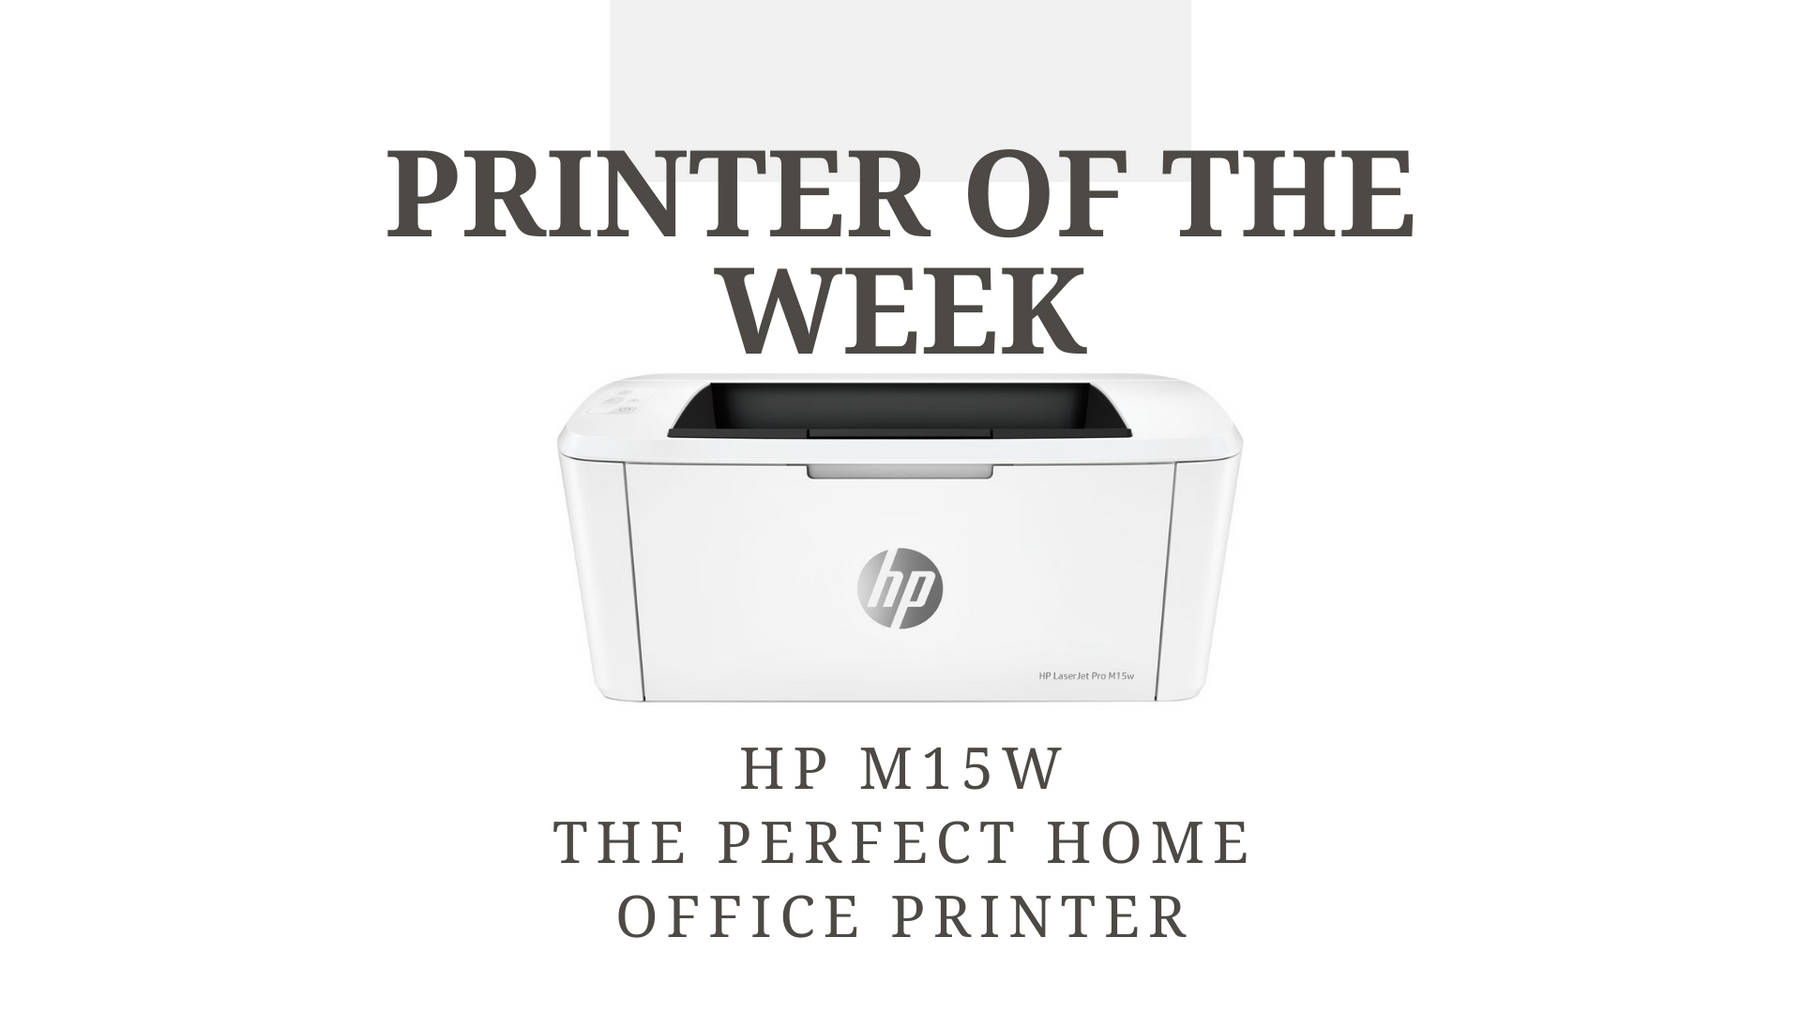 Image of the HP M15W printer with text 'printer of the week, HP M15w the perfect home office printer'